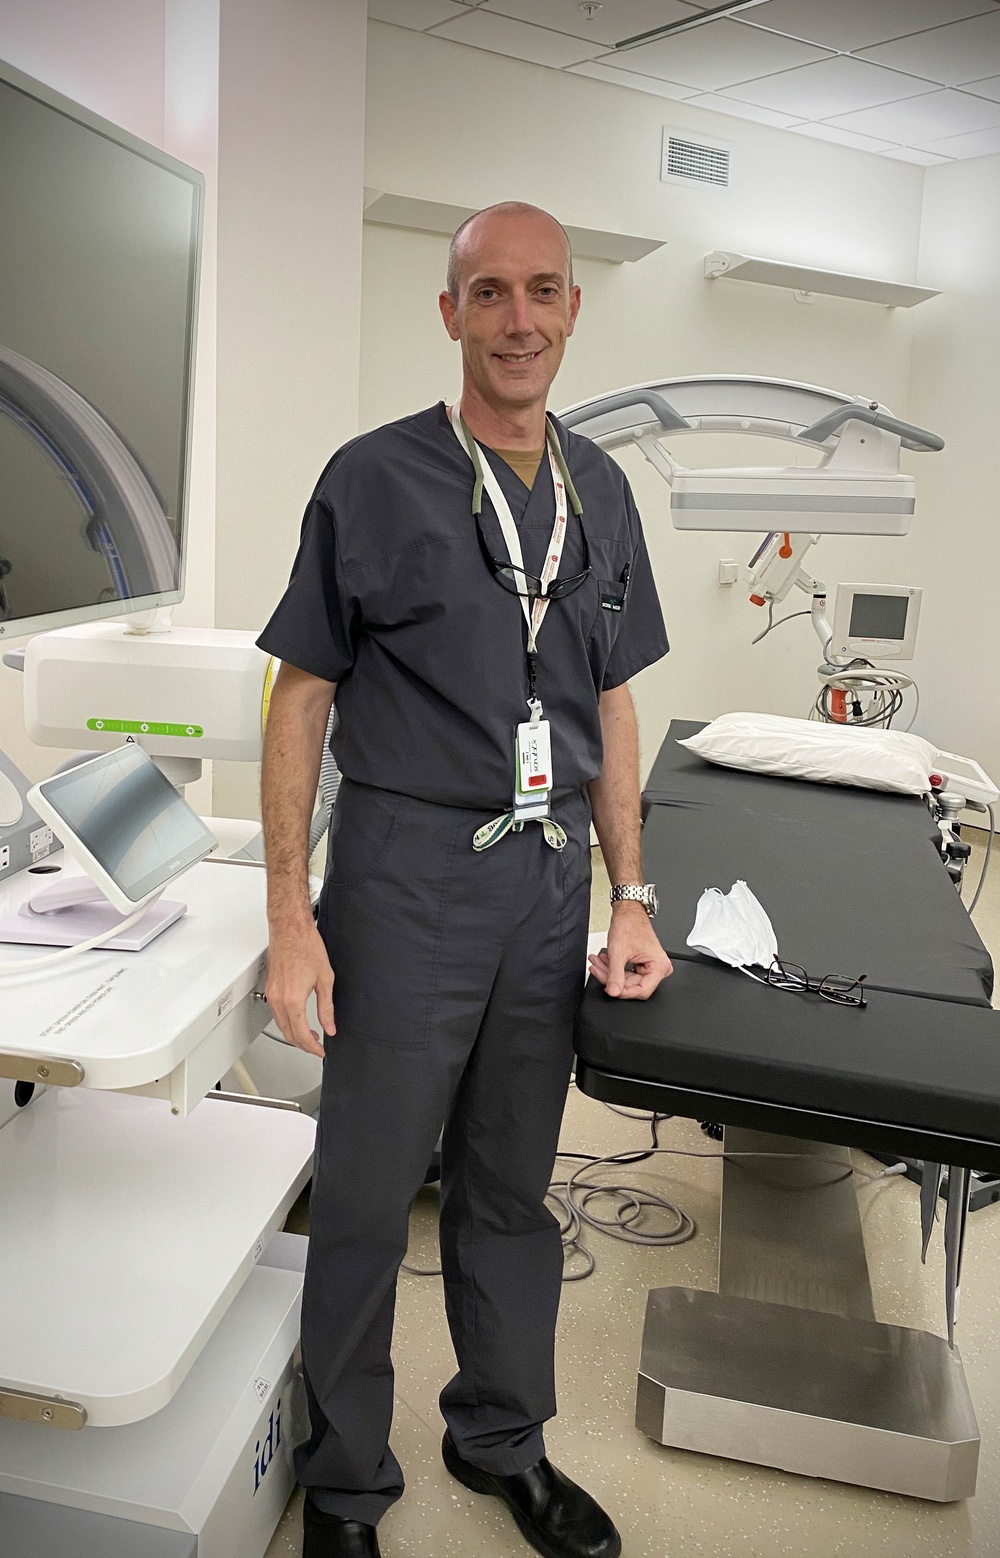 NMCCL’s first interventional radiologist moving vision of care forward